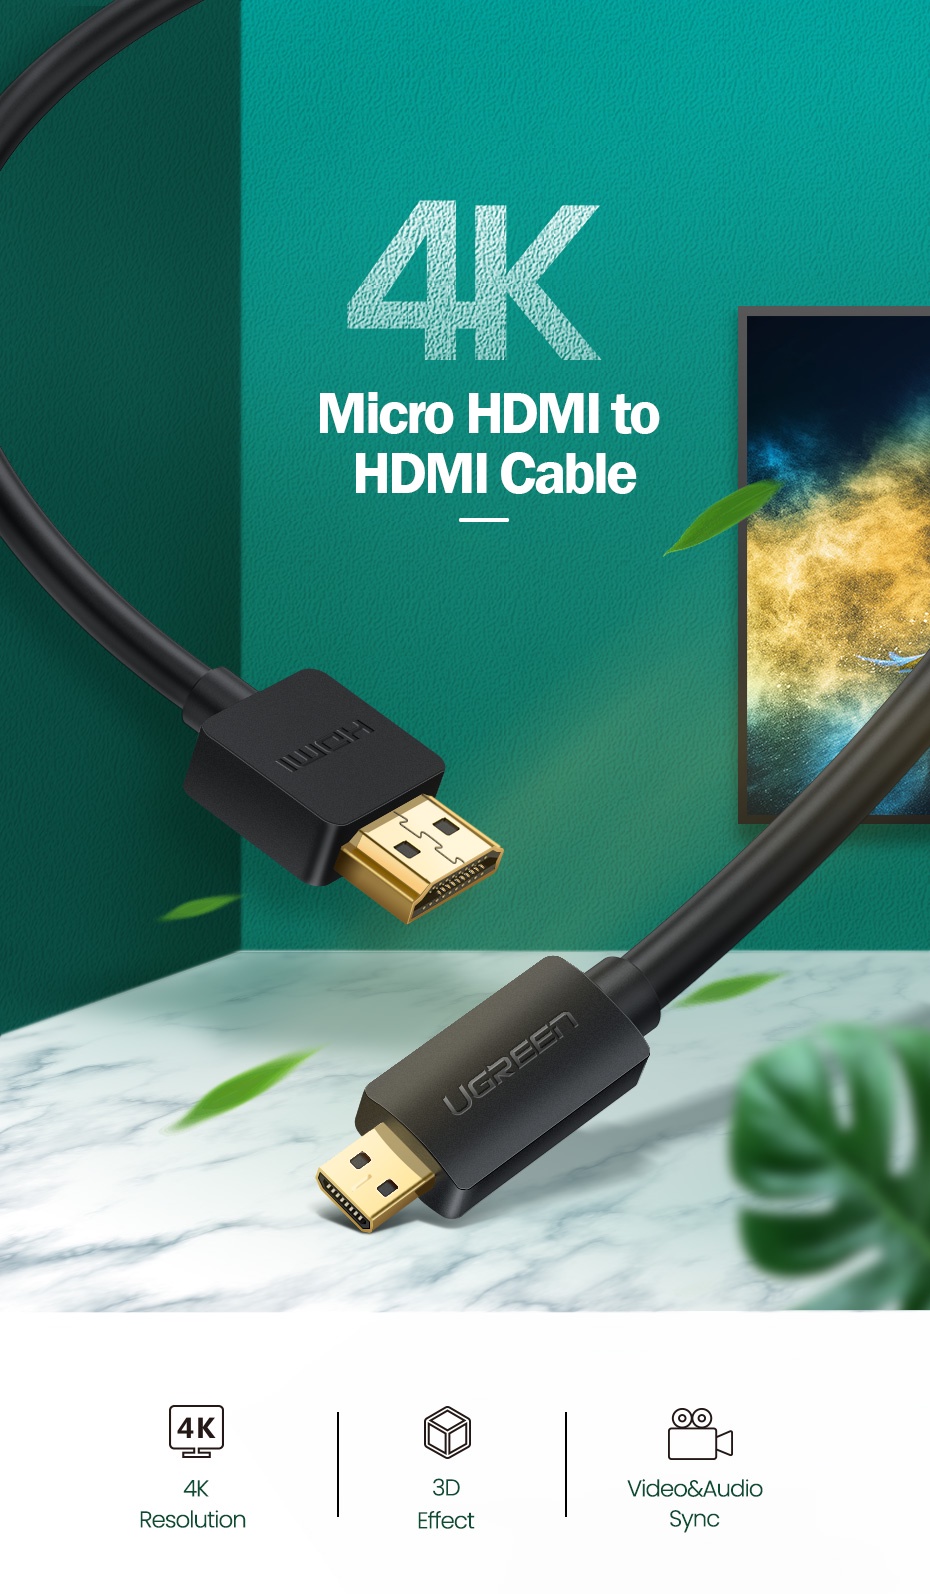 Micro HDMI to HDMI 4K - UGREEN Micro HDMI to HDMI 4K Cable 3D Adapter 1M - High Quality Video and Audio Transfer - SHOPEE MALL | Sri Lanka